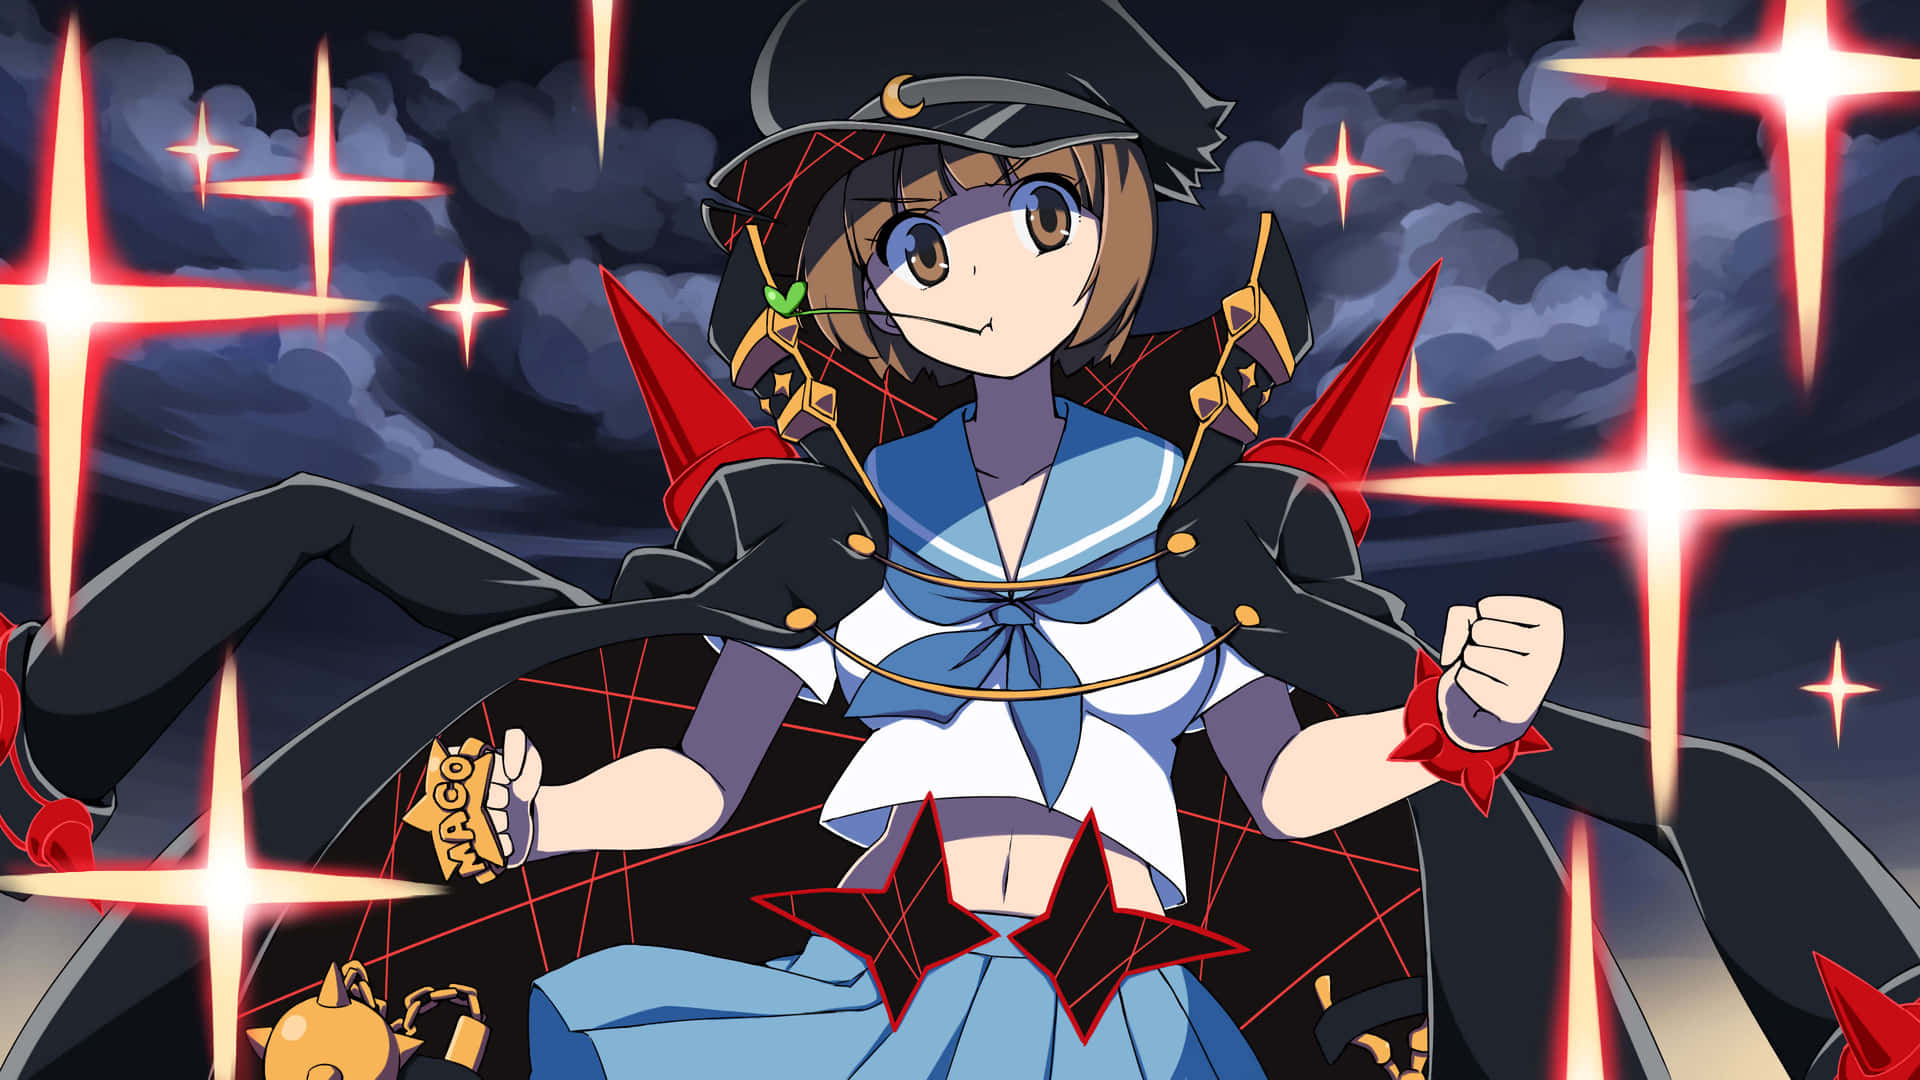 Fearless and determined, Ryuuko Matoi will stop at nothing to uncover the truth in Kill La Kill